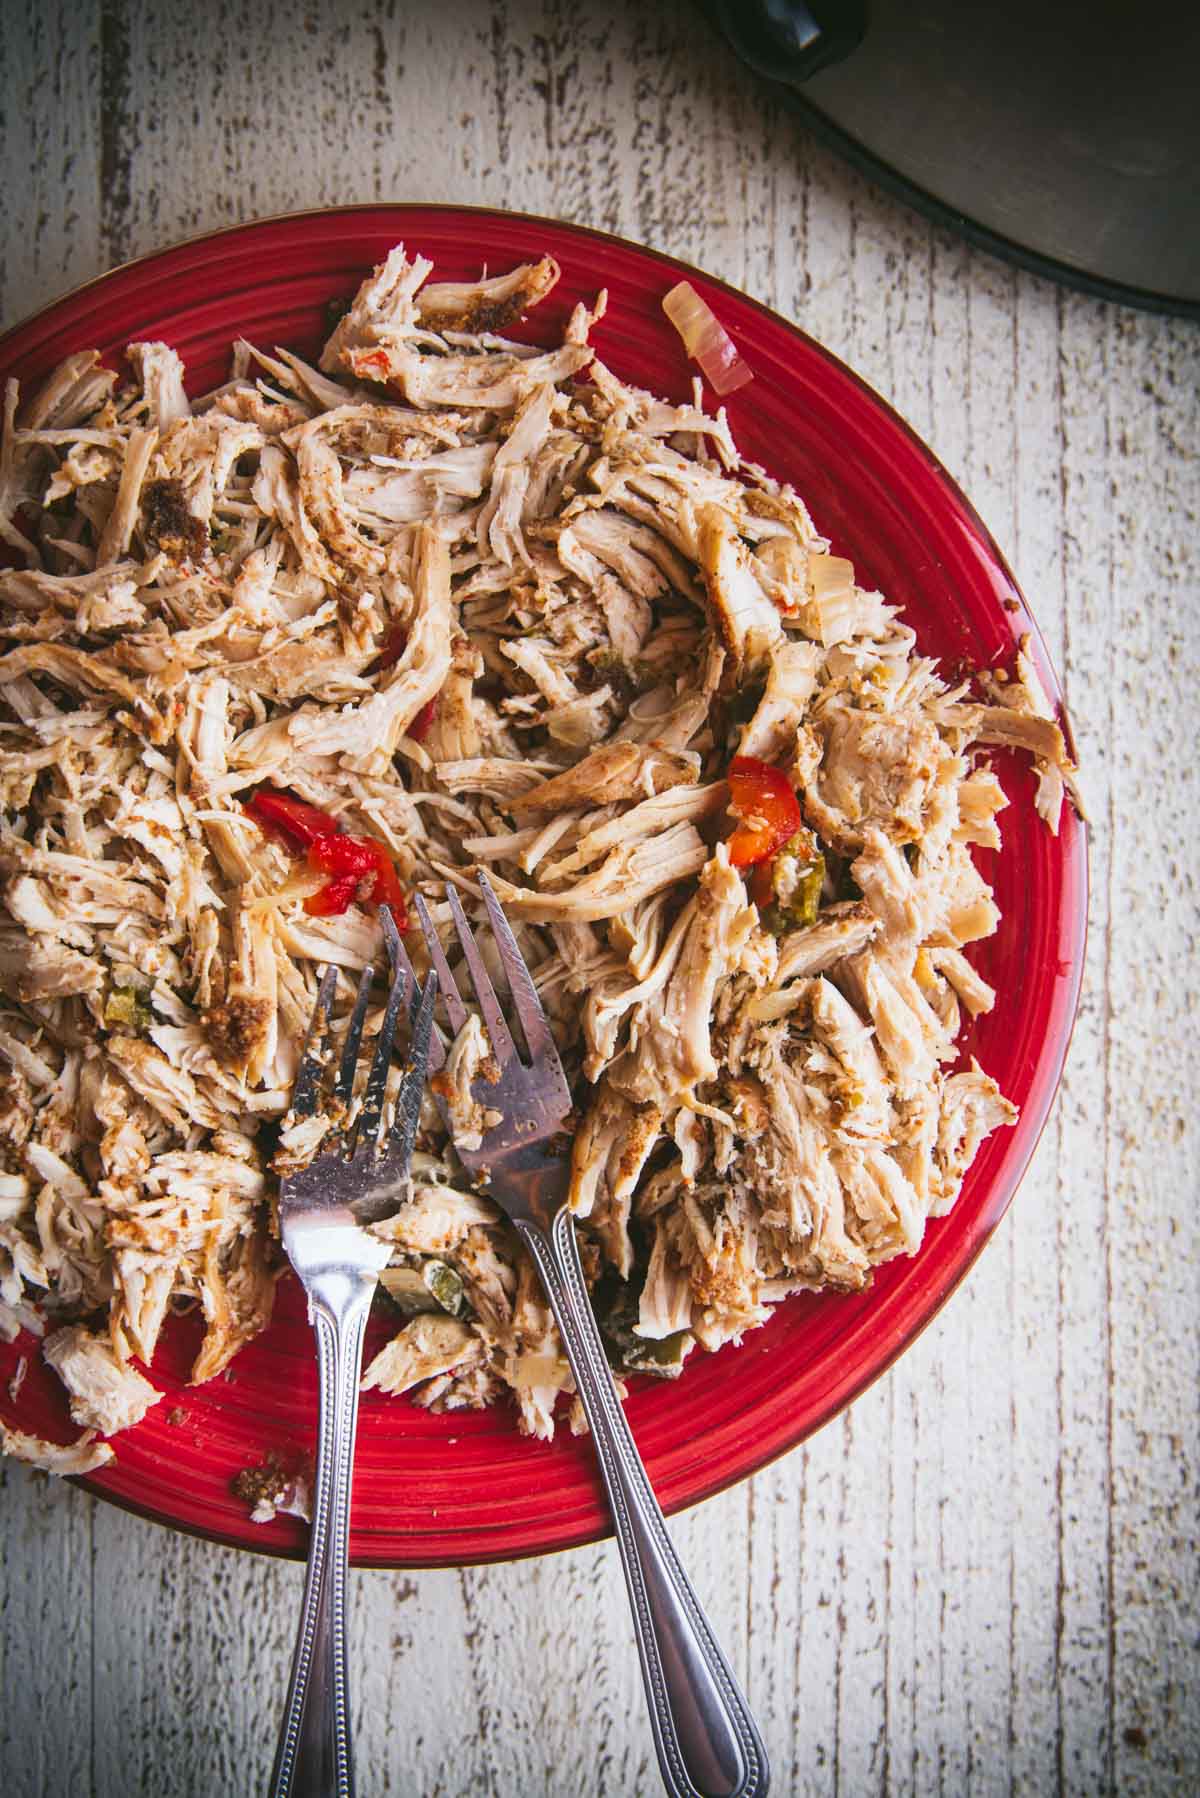 The chicken has been shredded between 2 forks and placed on a red plate with the 2 forks sitting on top.